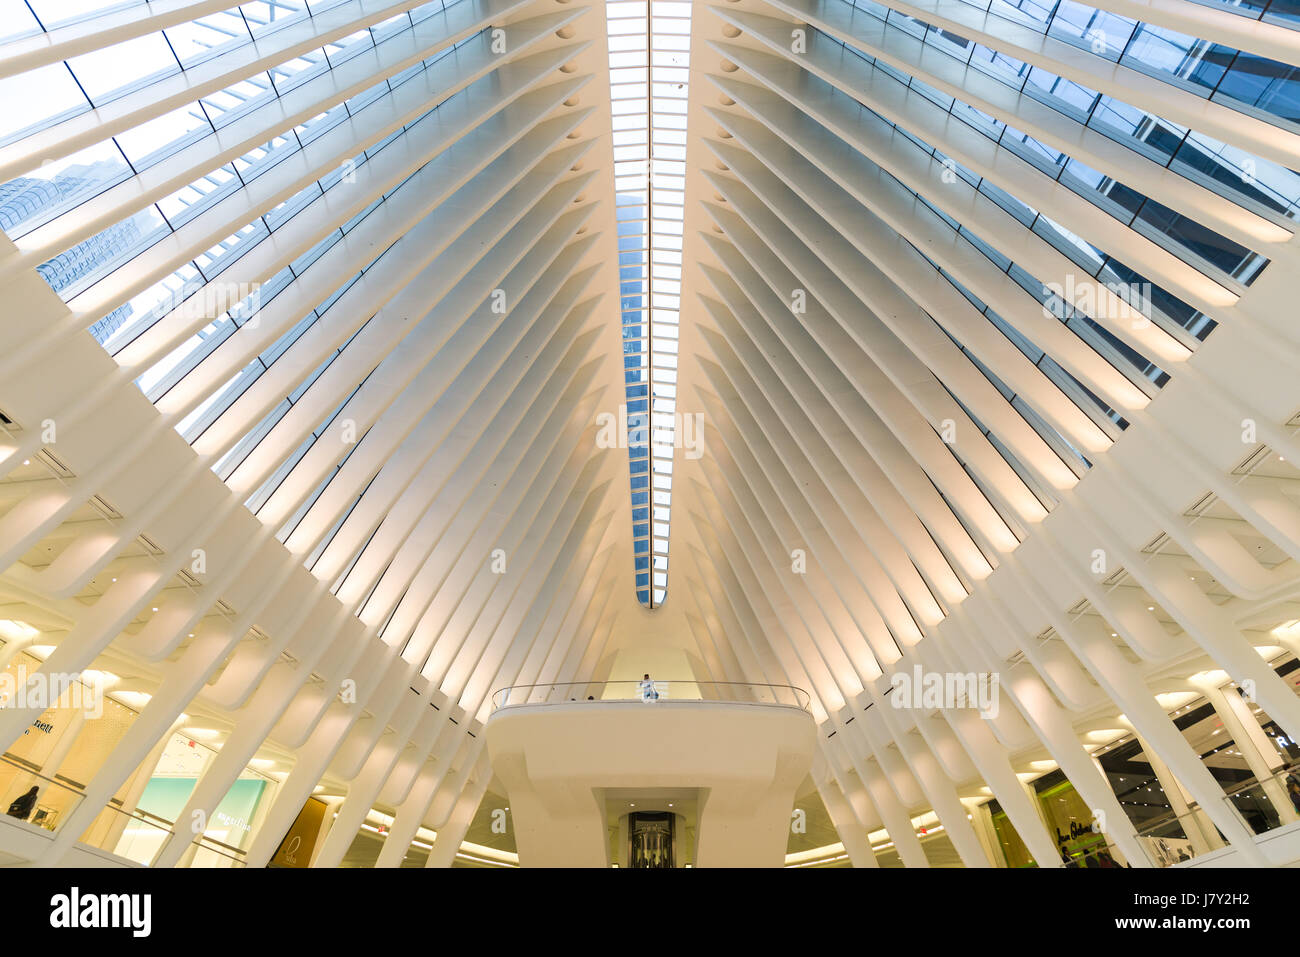 Interior Of The Oculus World Trade Center Transportation Hub Looking At Ceiling Design, New York Stock Photo